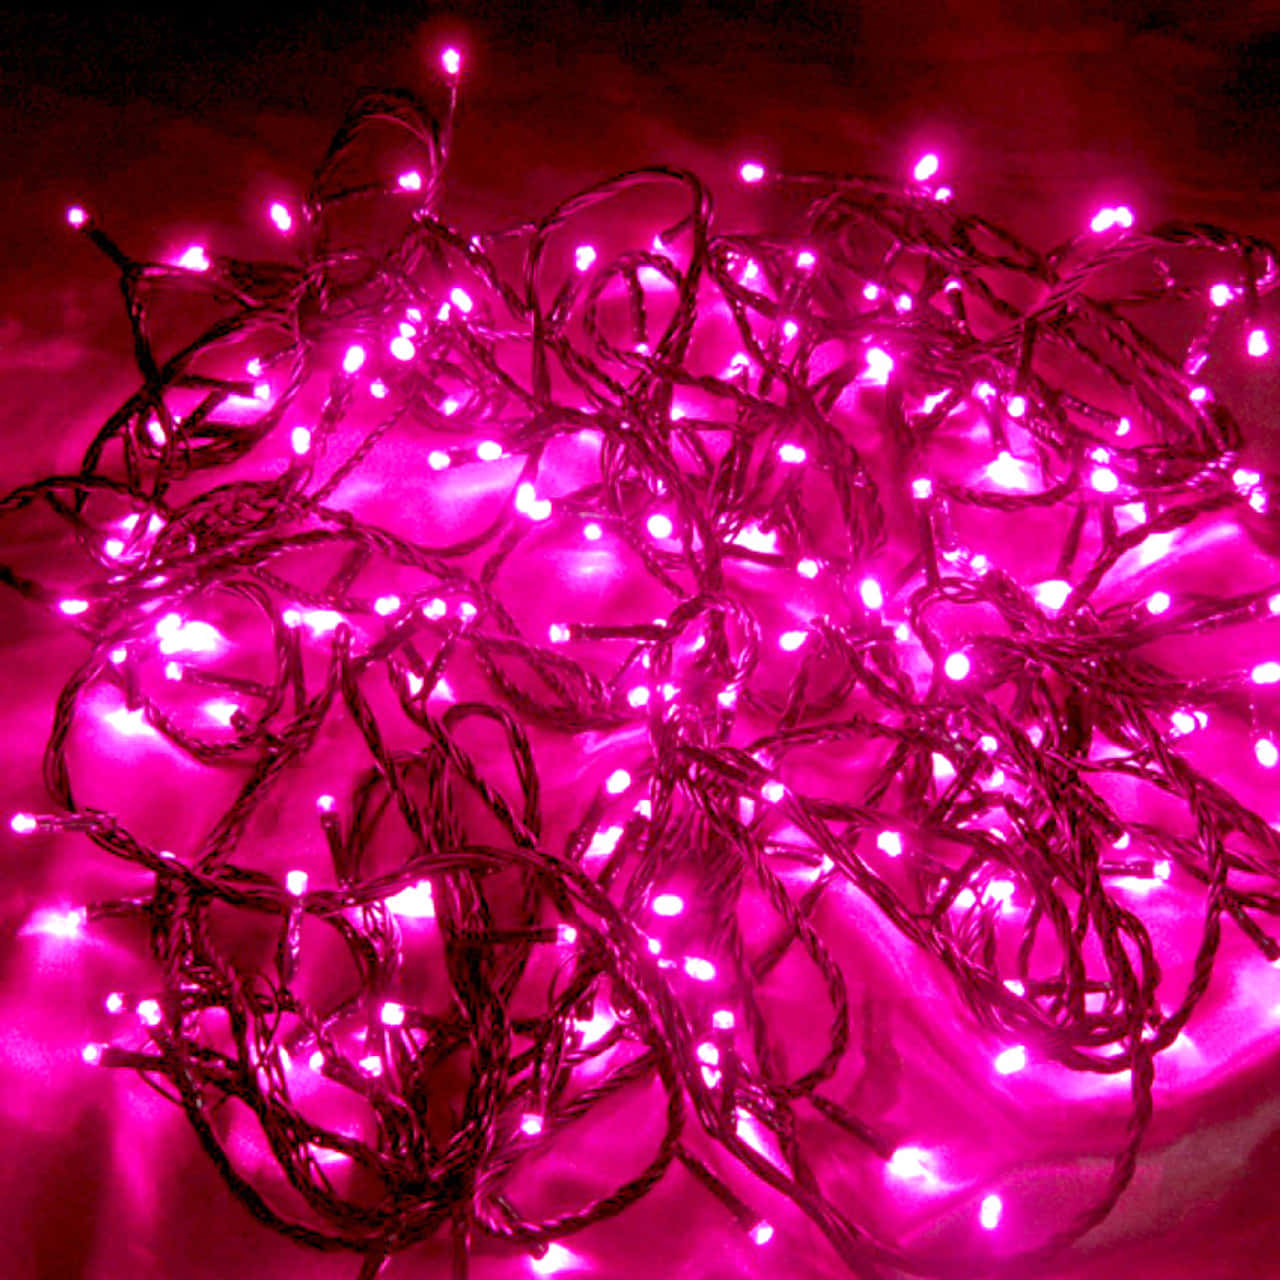 A string of pink fairy lights draped across a room creates a magical, warm ambience. Wallpaper